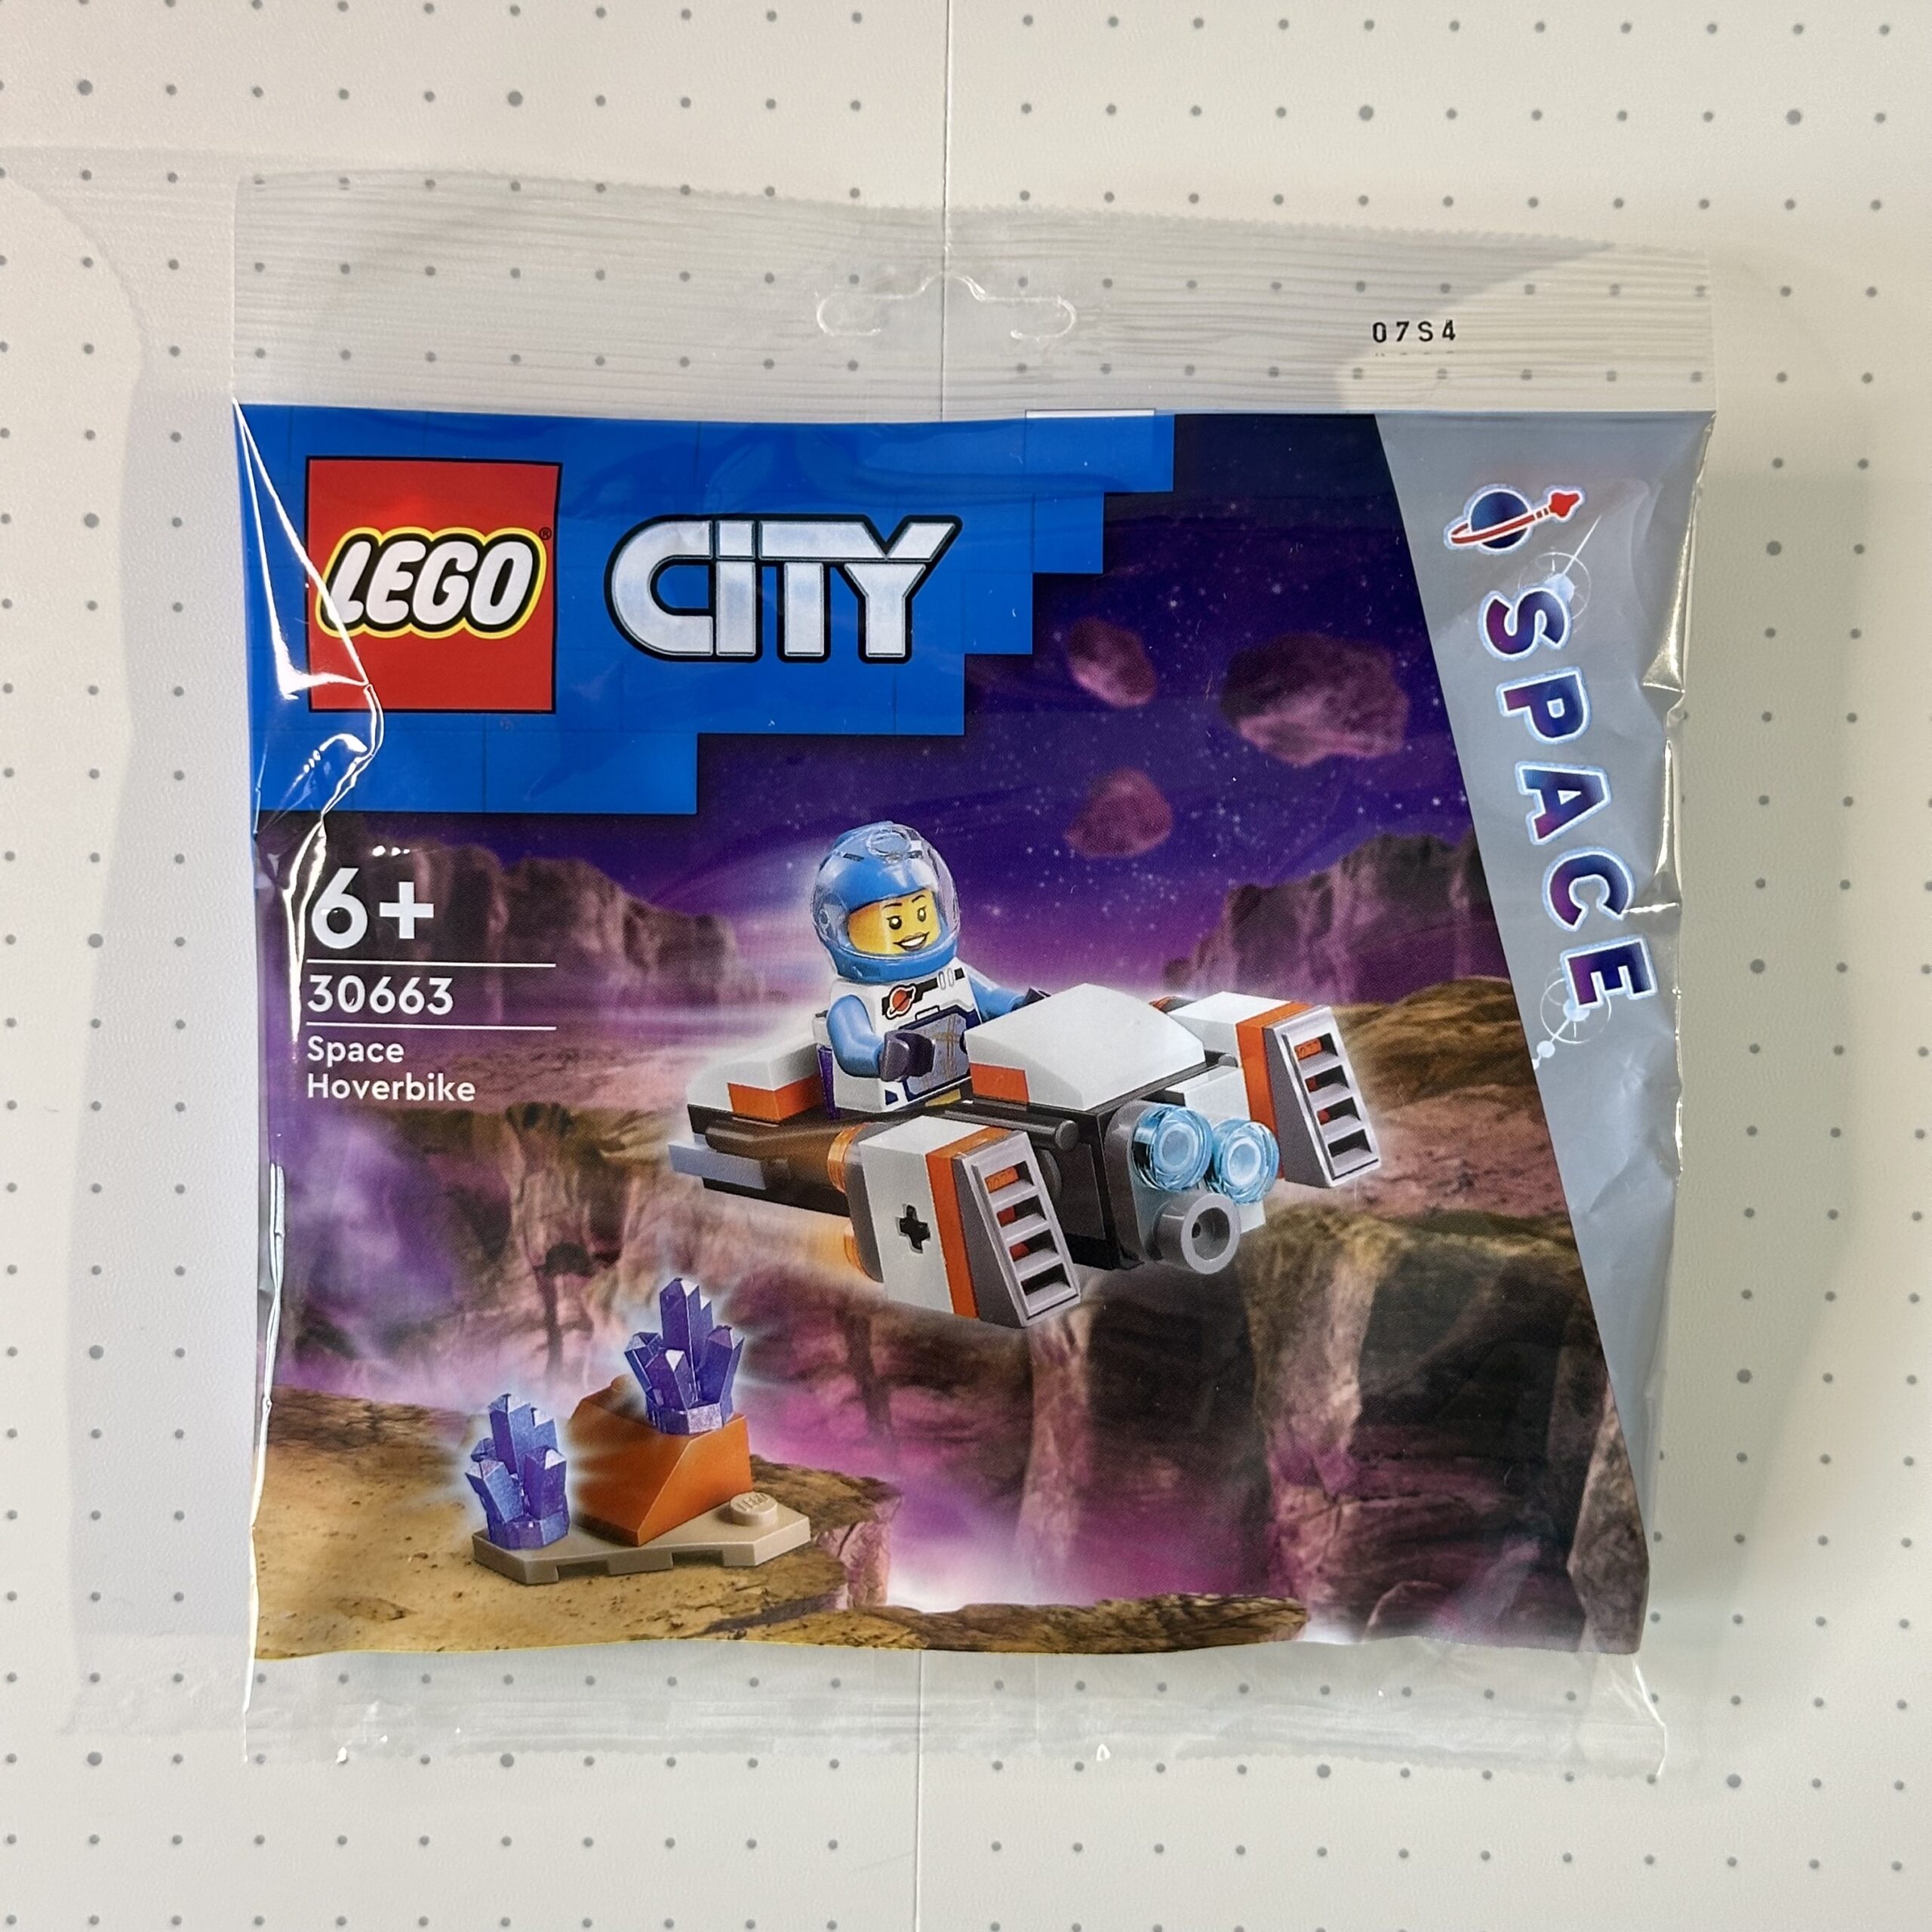 Bag for LEGO City Space set 30663 Space Hoverbike. Shows an astronaut flying a white, orange, and gray hover bike over alien terrain in space.